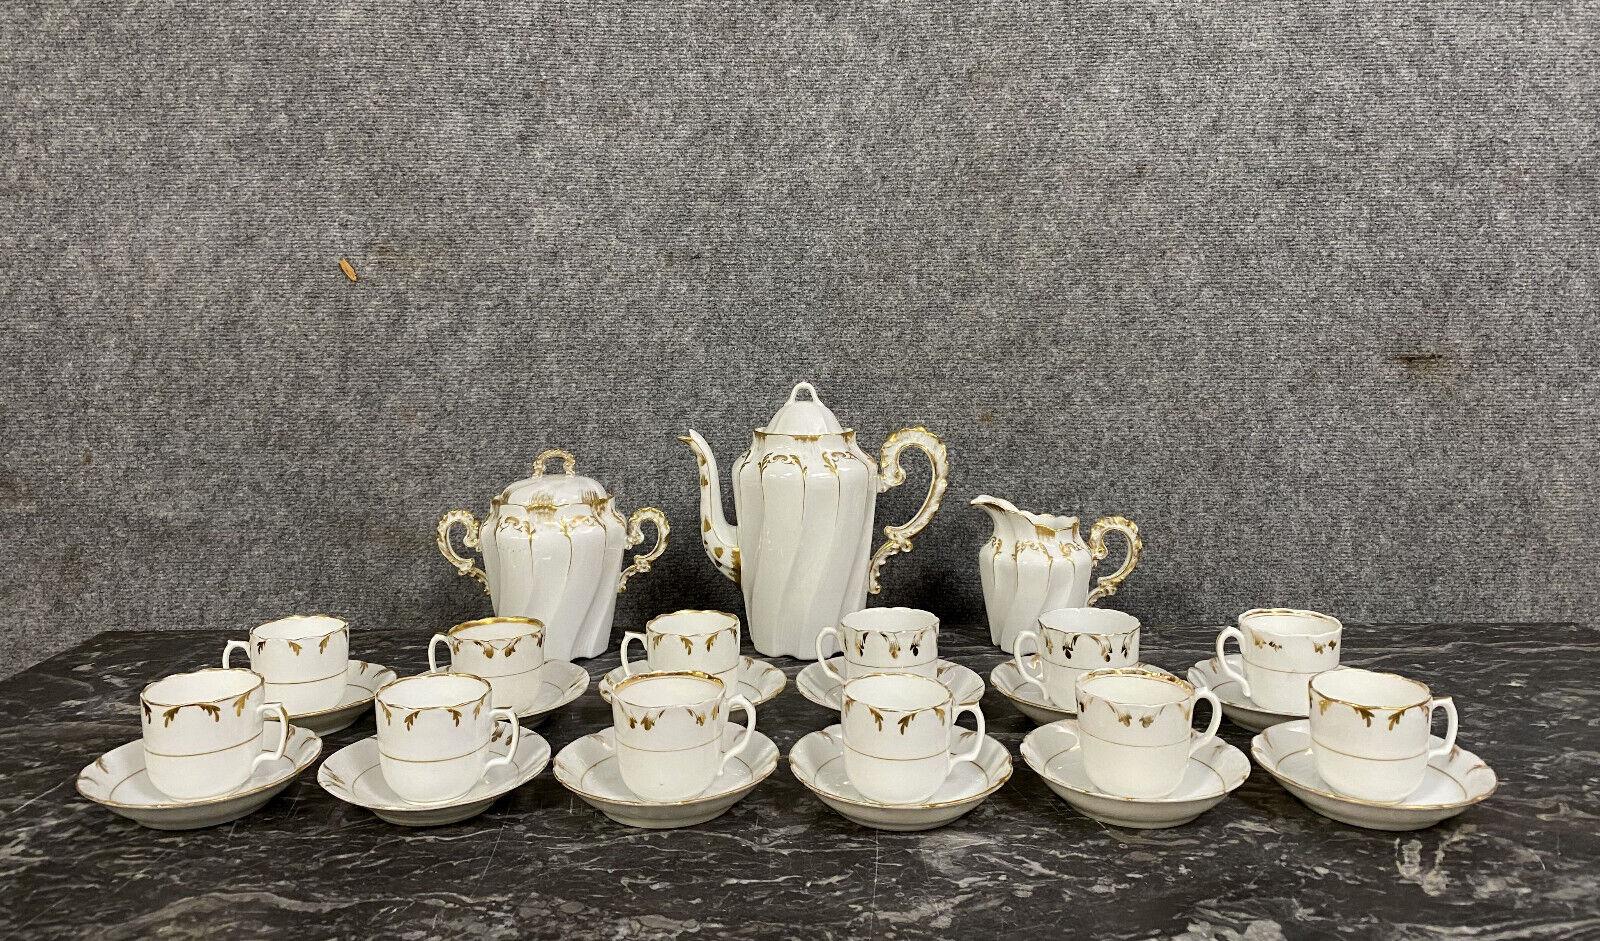 Indulge in the refined elegance of the late 19th century with this exquisite Lyonnaise porcelain coffee service, crafted around 1880. Adorned with delicate golden motifs against a pristine white backdrop, this set exudes timeless charm and